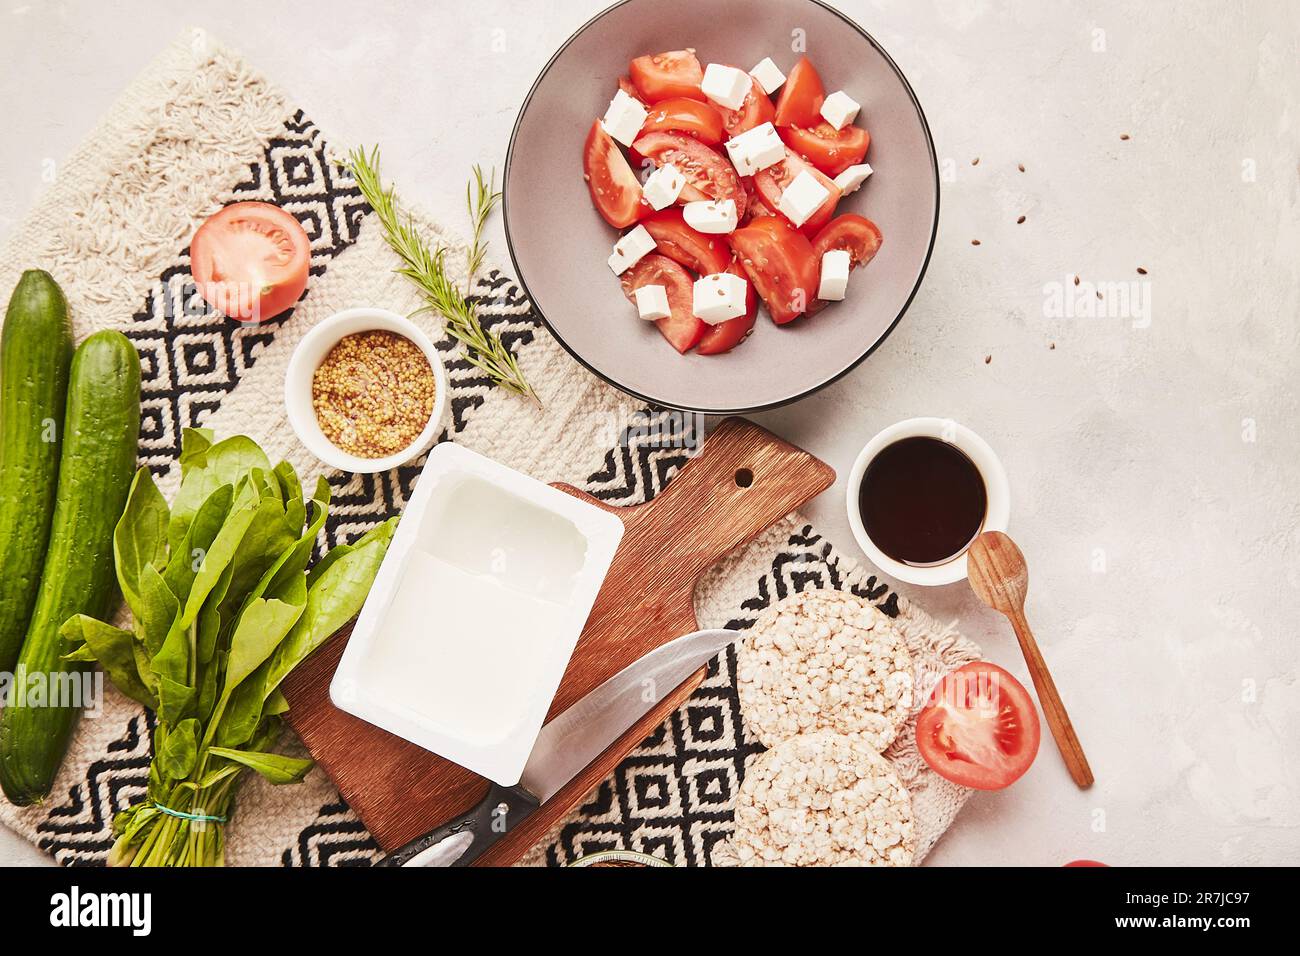 Seasonal ingredients for healthy low fodmap, Mediterranean diet with vegetables, fruits, greens, salad with feta. Flat lay, copy space. Stock Photo